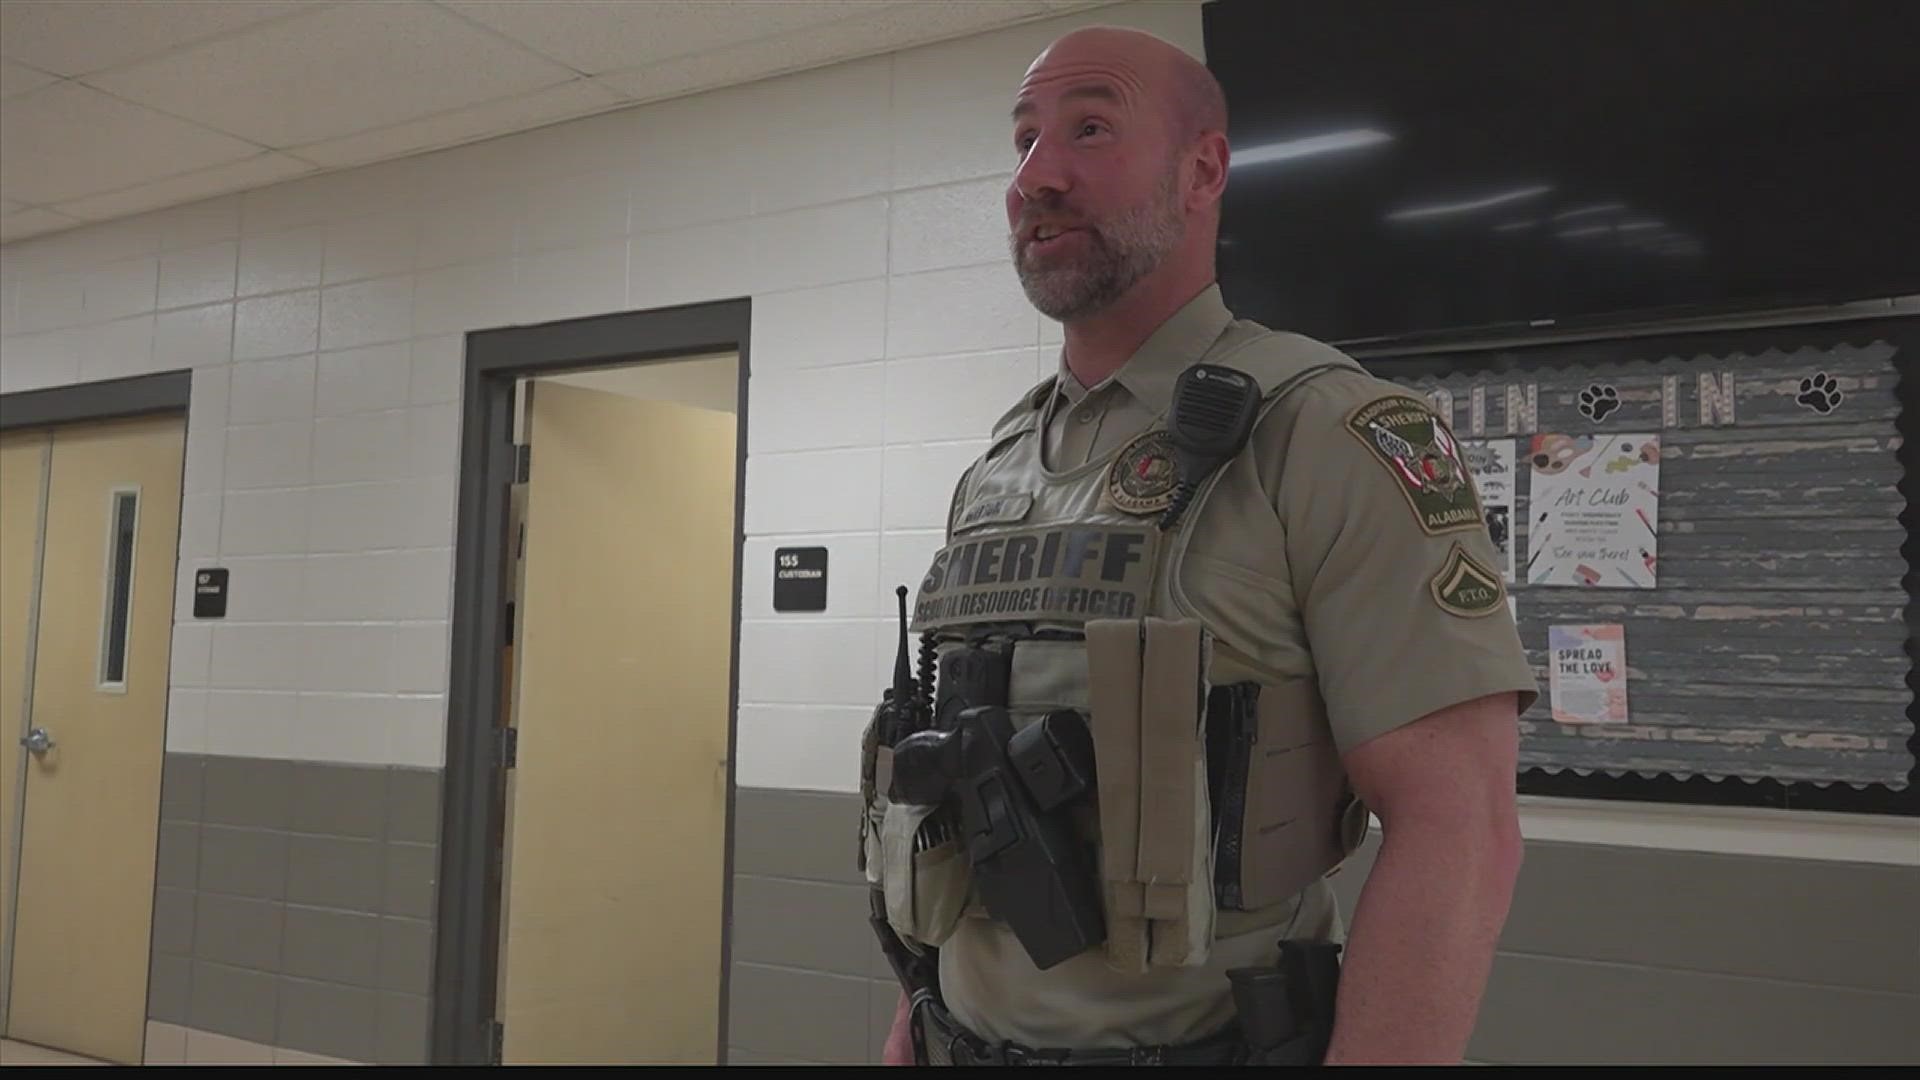 Wednesday was National School Resource Officer Appreciation Day. Officers we spoke with say each day comes with its own differences and challenges.